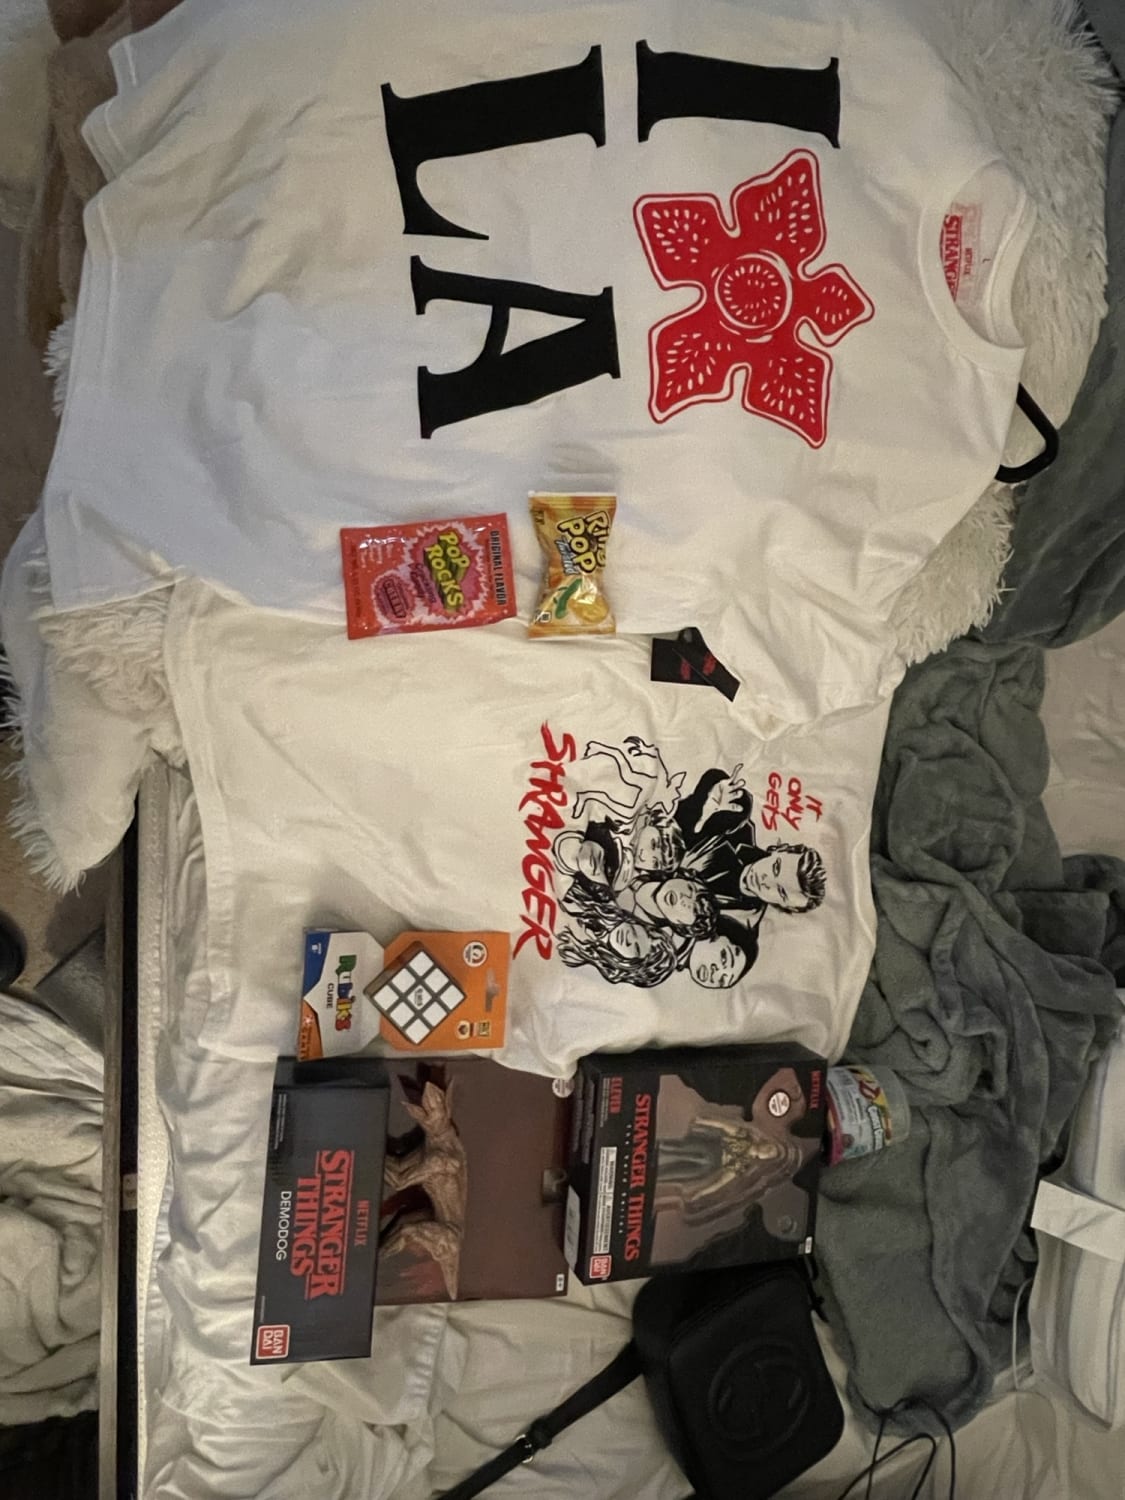 La, stranger things store. Candy and Rubik’s cube are original styling from the 80s. Total was 130ish. Happy with my purchase but wasn’t expecting to spend this much. If near Glendale galleria I recommend you check it out.